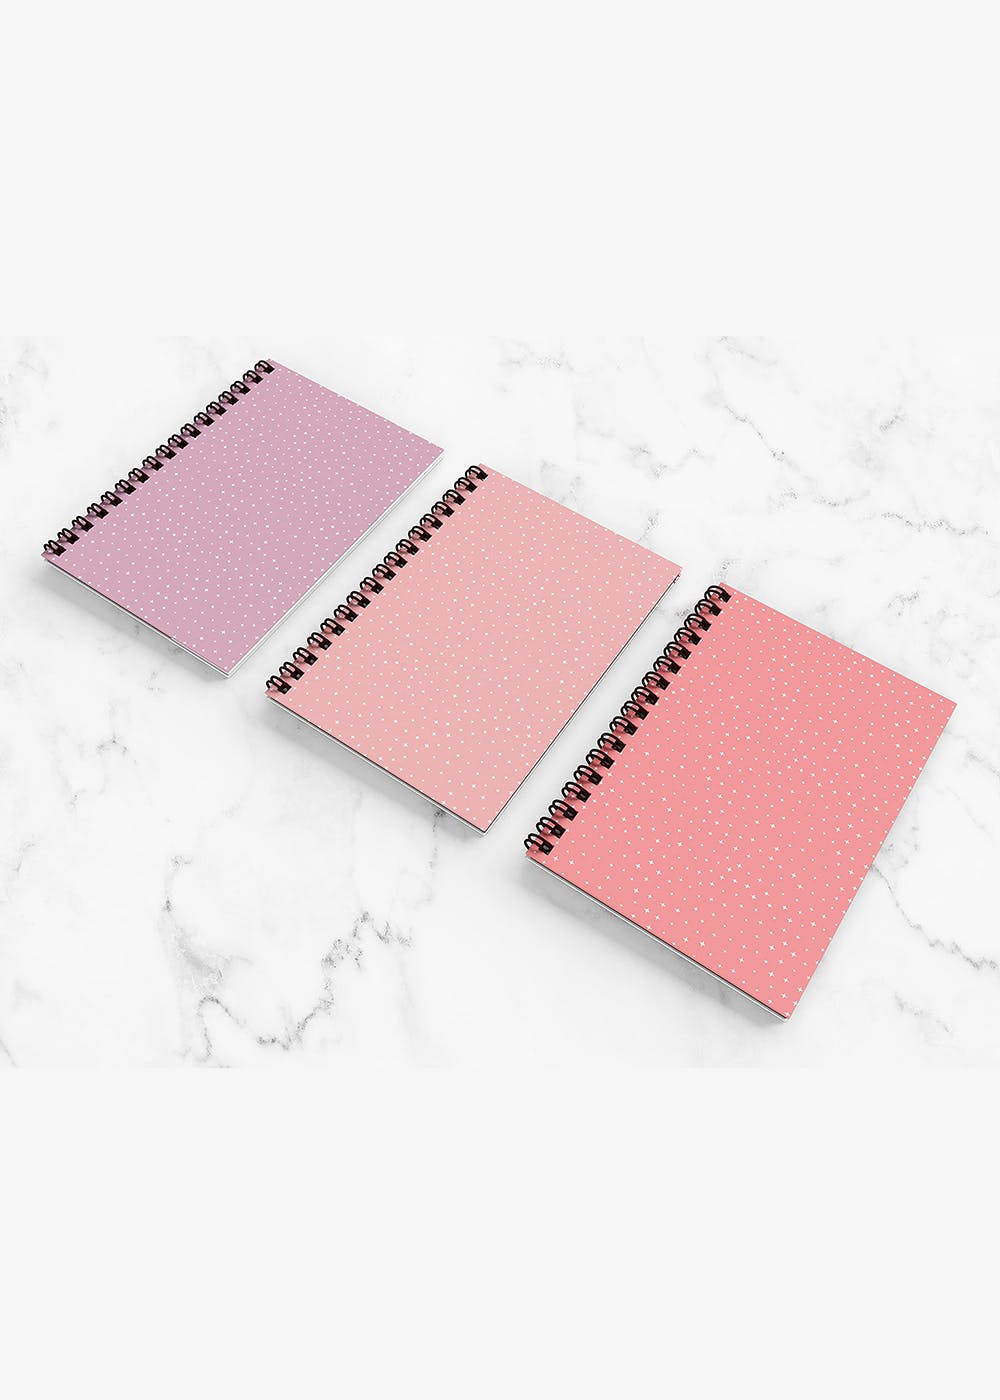 Set of 3 Square Grid A5 Notebooks (100 Pages Each) - Starry Pastel